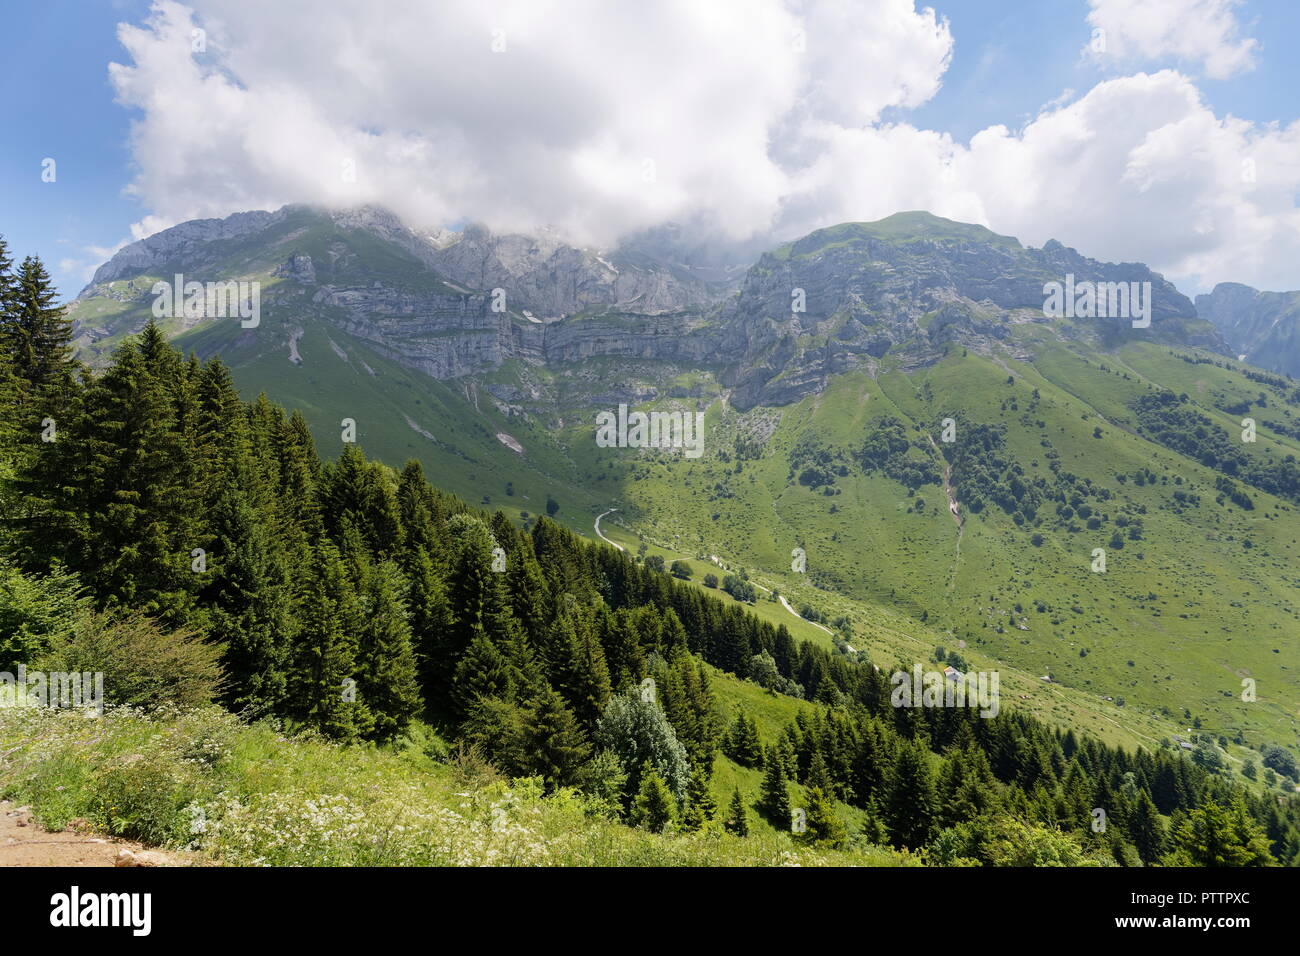 View towards La Tournette from a footpath trail in the forests around Col de la Forclaz France Stock Photo